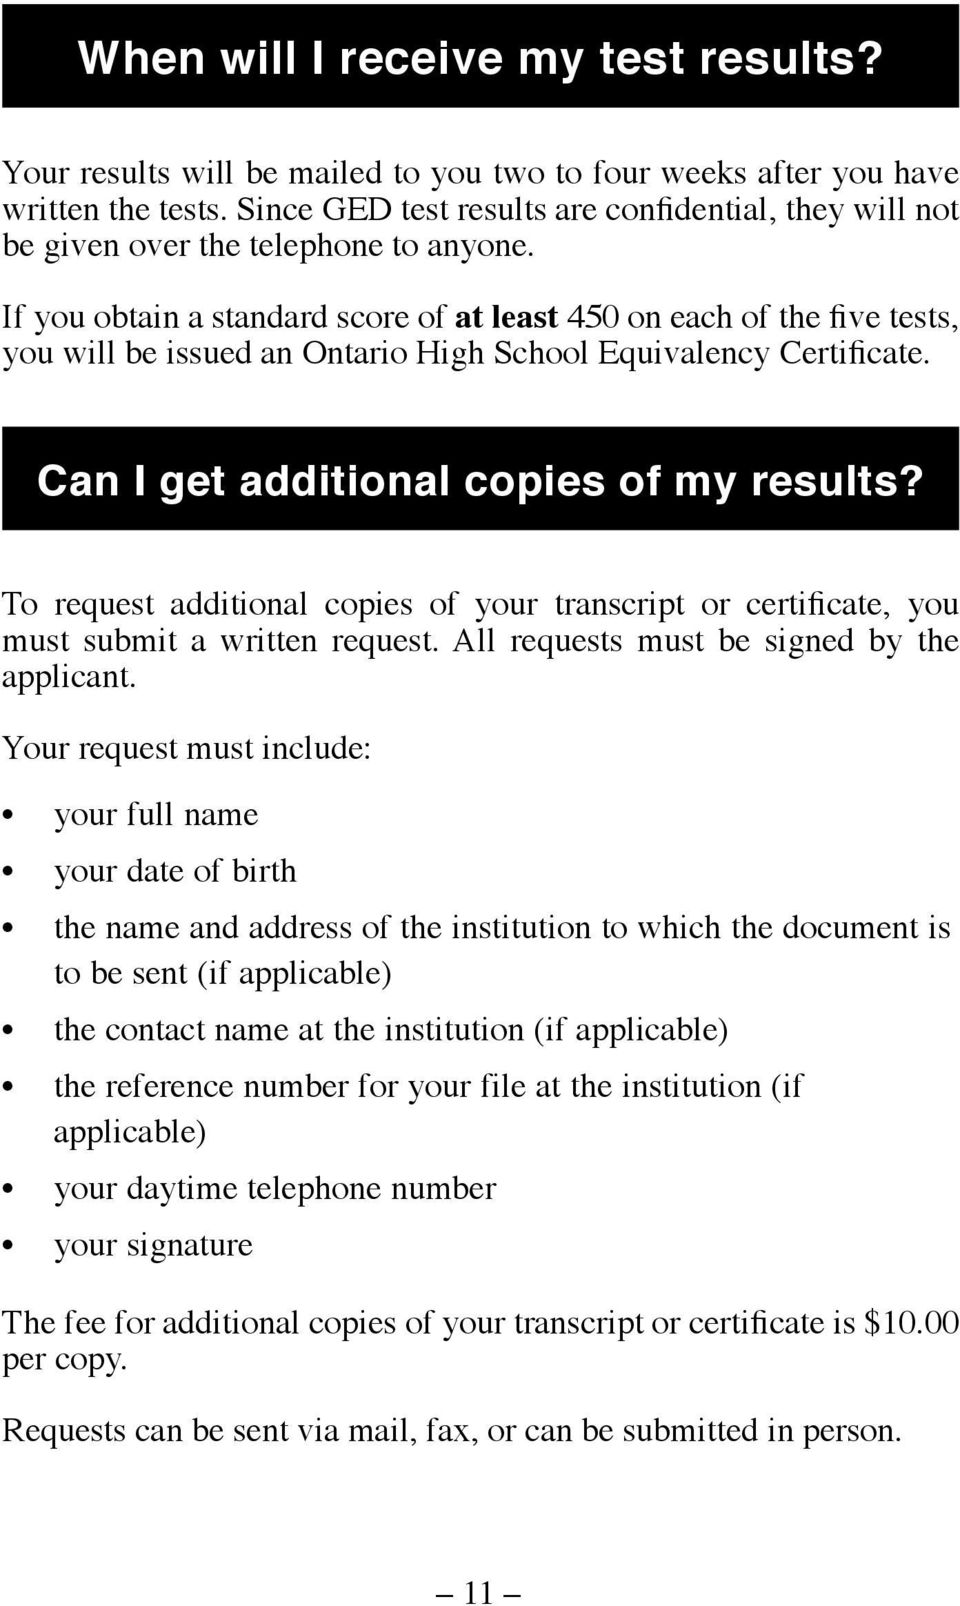 If you obtain a standard score of at least 450 on each of the five tests, you will be issued an Ontario High School Equivalency Certificate. Can I get additional copies of my results?